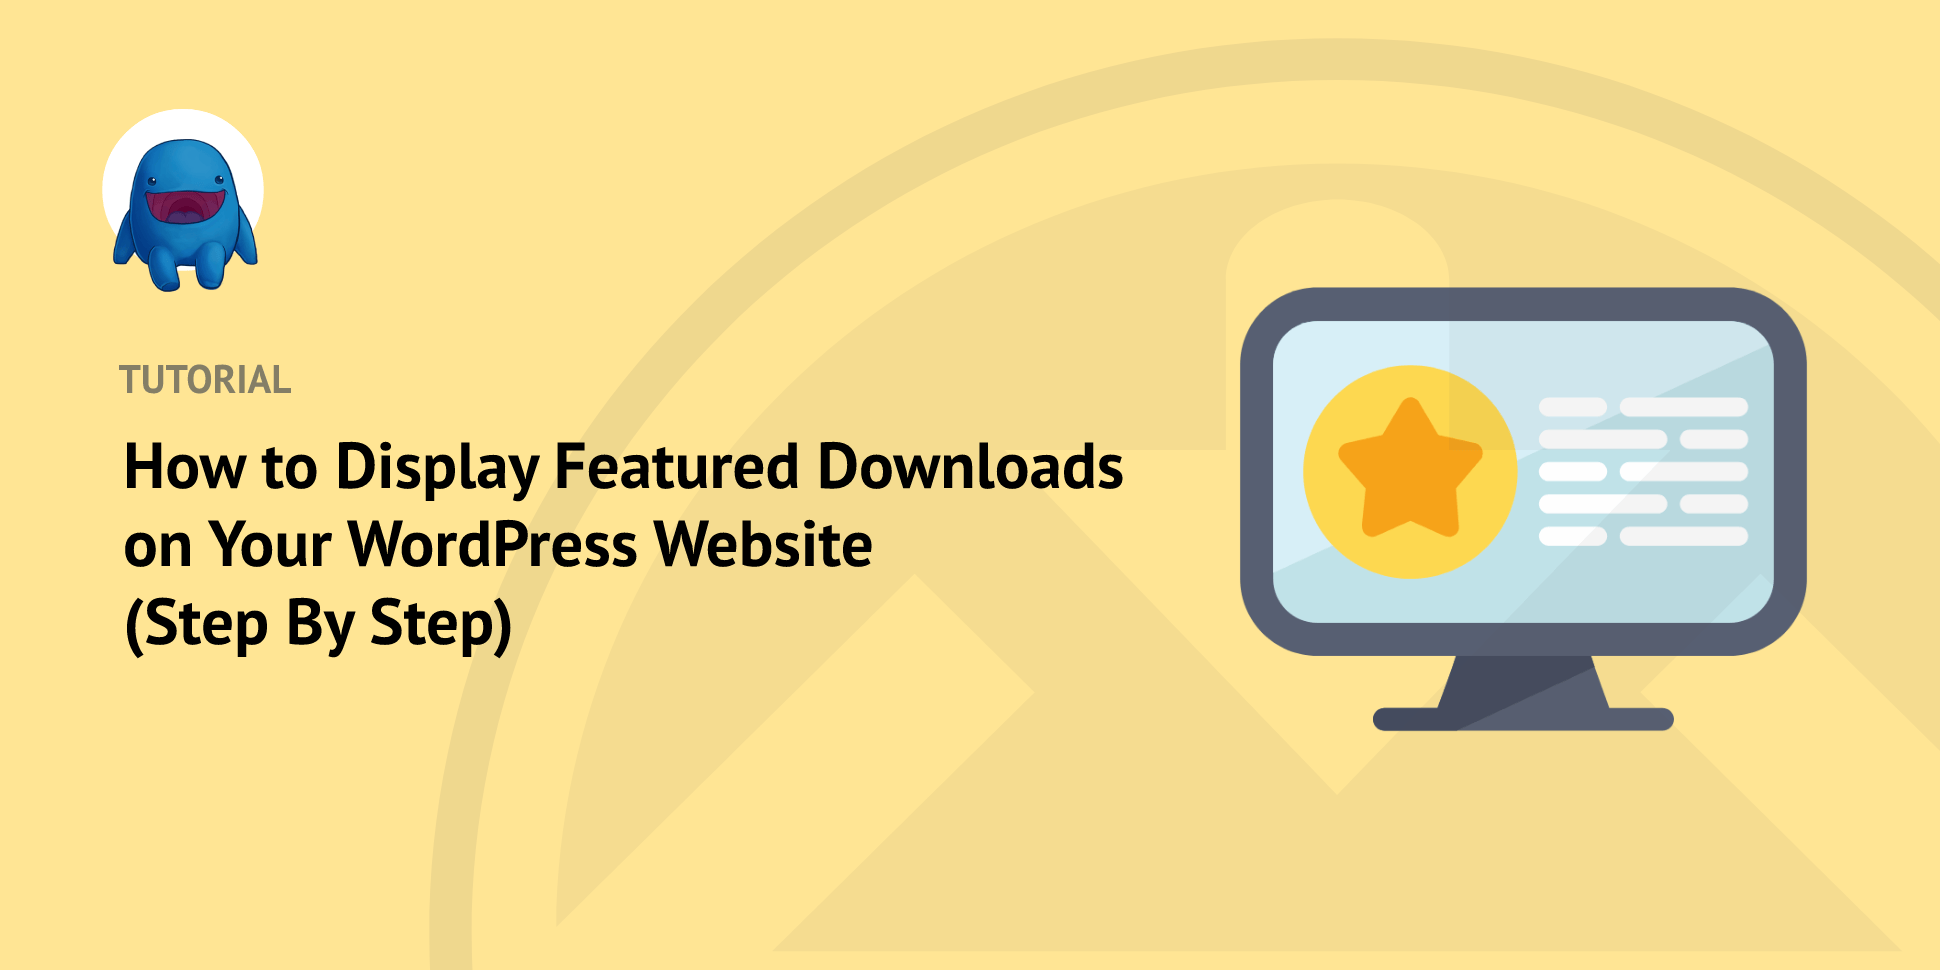 How to Display Featured Downloads in WordPress